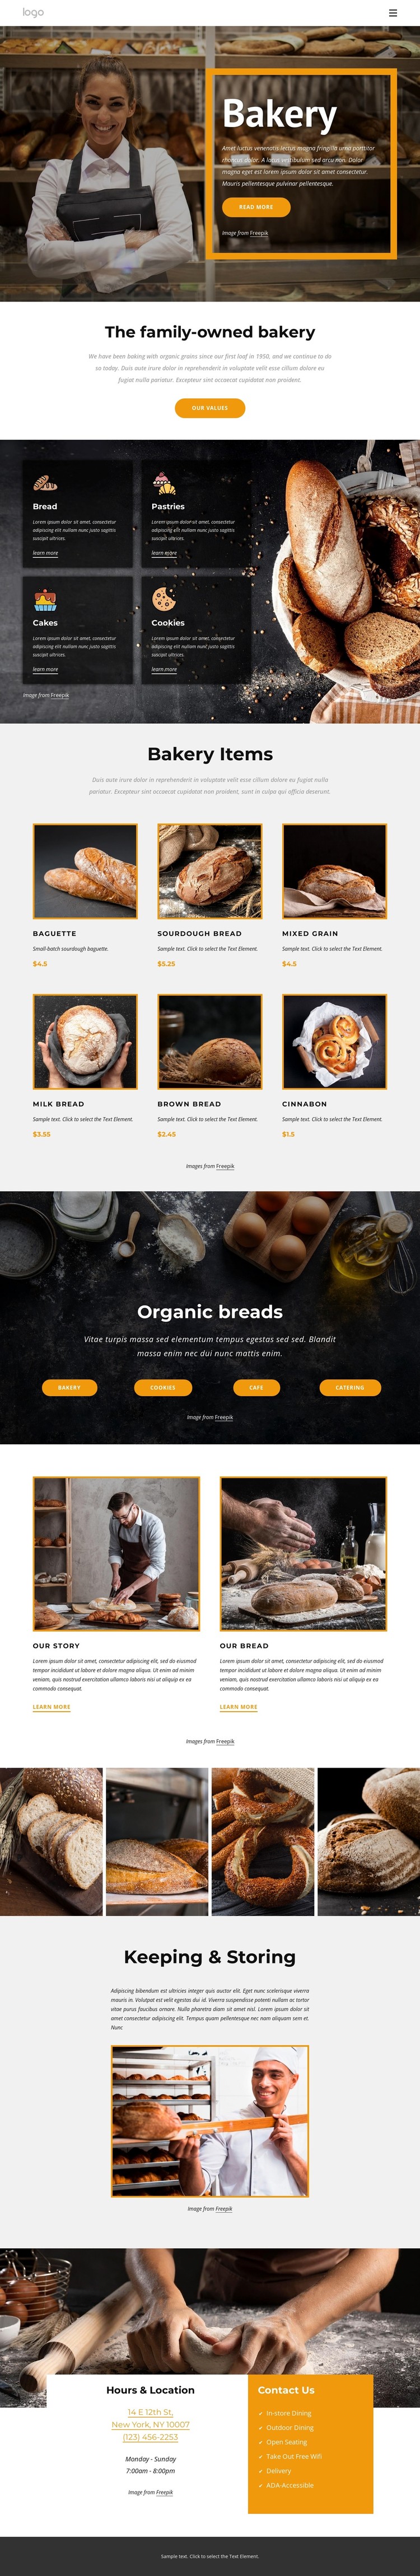 The family-owned bakery Static Site Generator